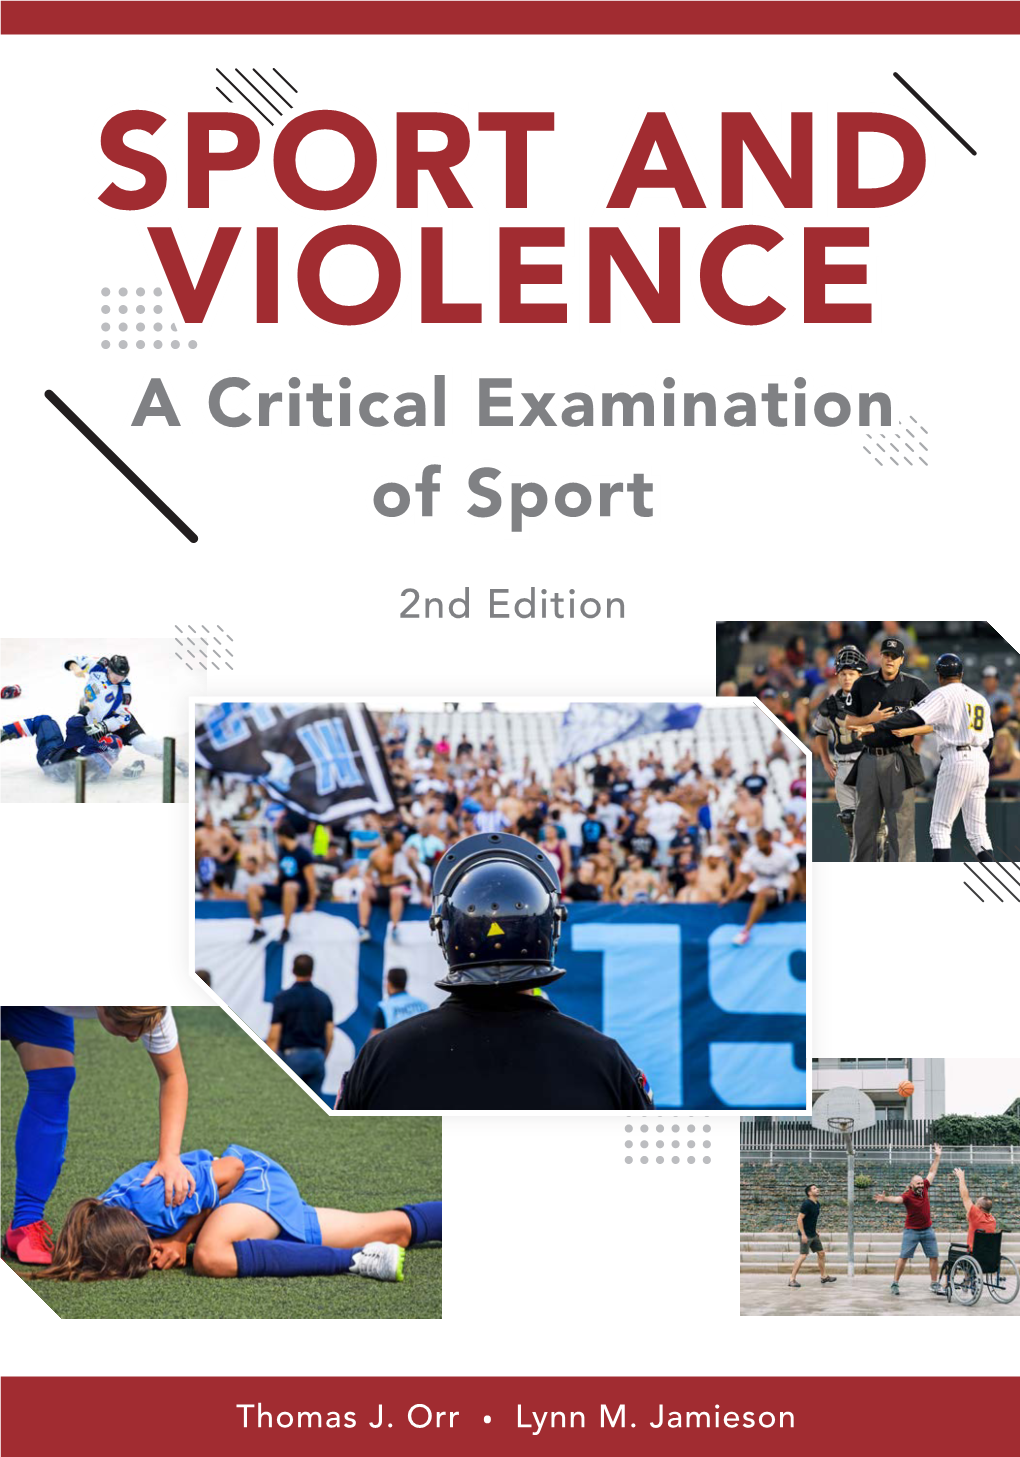 SPORT and VIOLENCE a Critical Examination of Sport